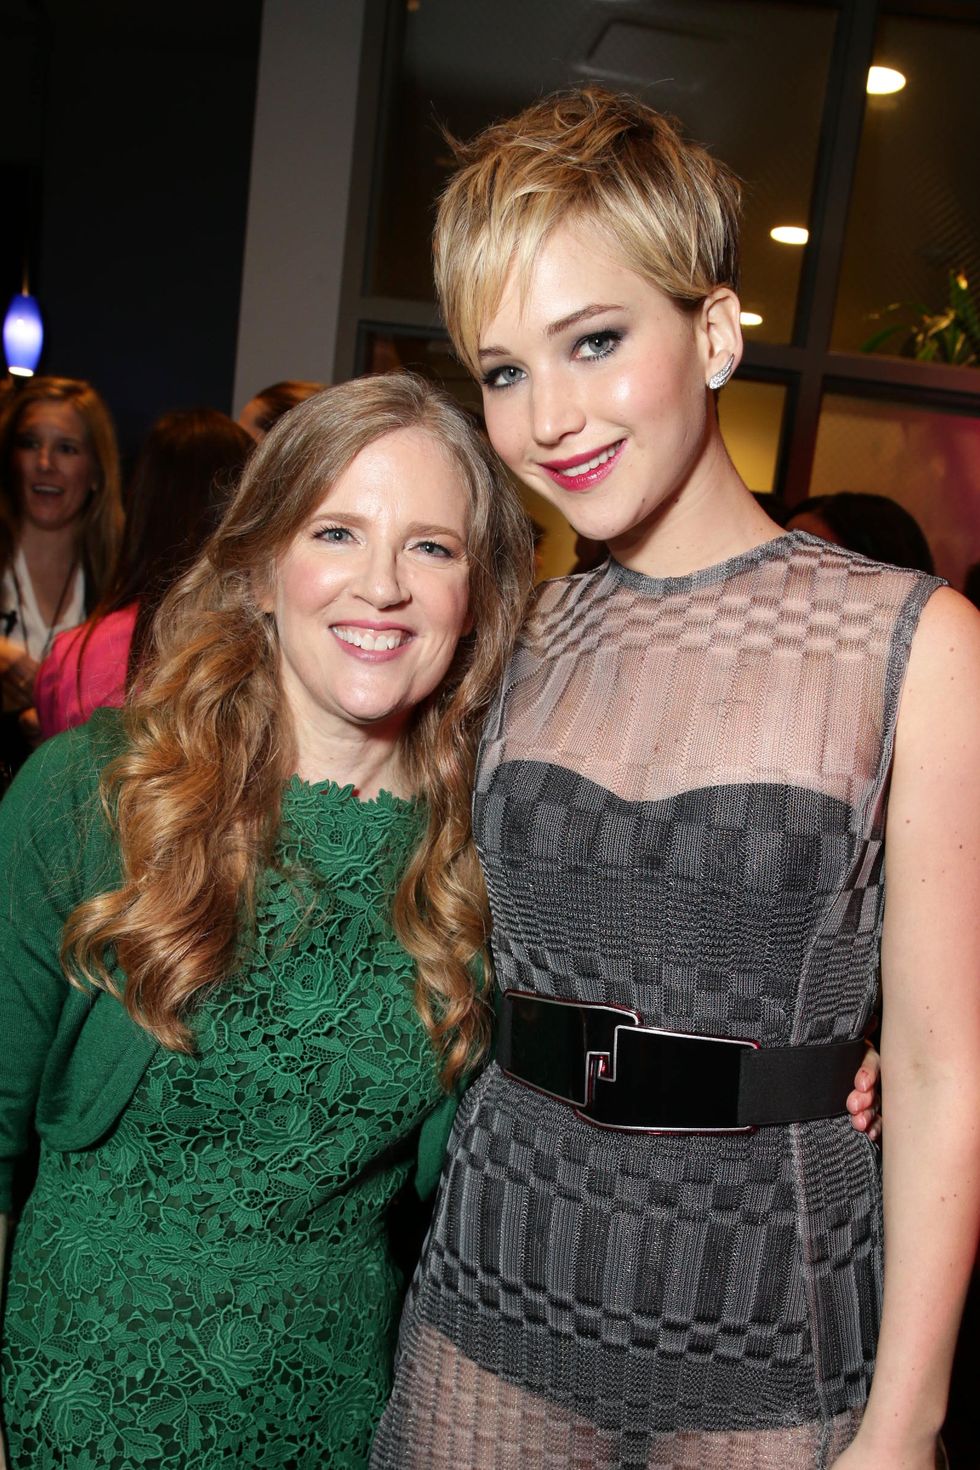 suzanne collins embracing jennifer lawrence for a photo